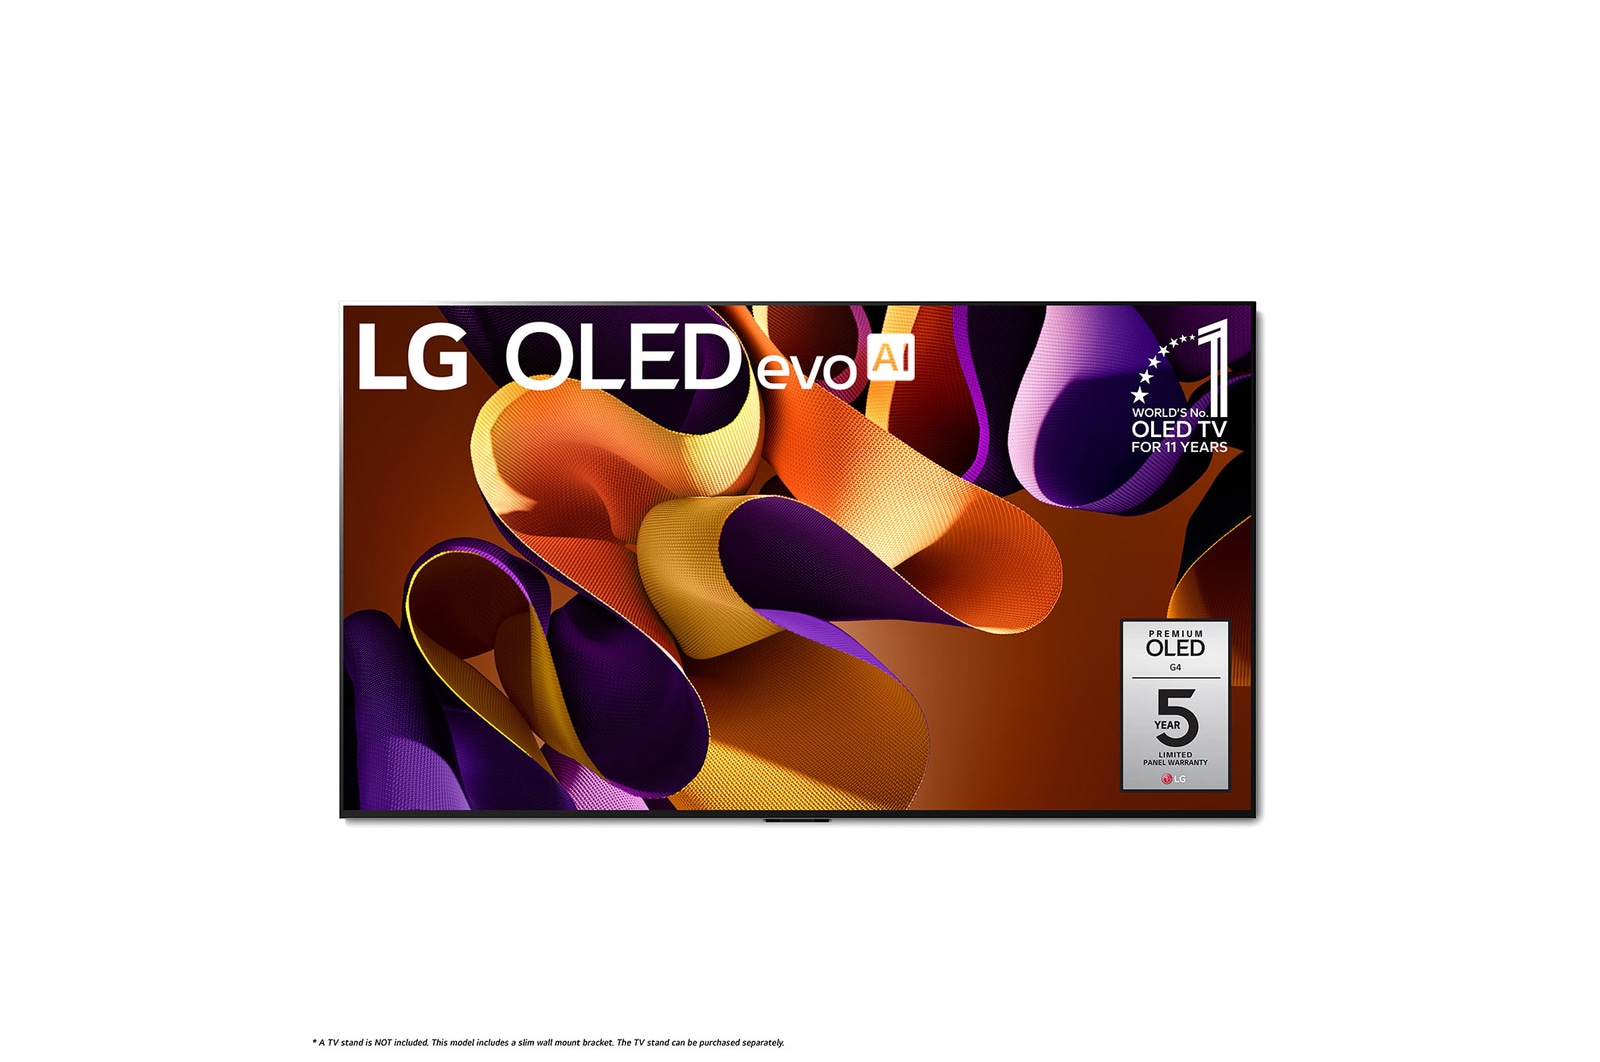 Front view with LG OLED evo AI TV, OLED G4, 11 Years of world number 1 OLED Emblem, webOS Re:New Program logo, and 5-Year Panel Warranty logo on screen